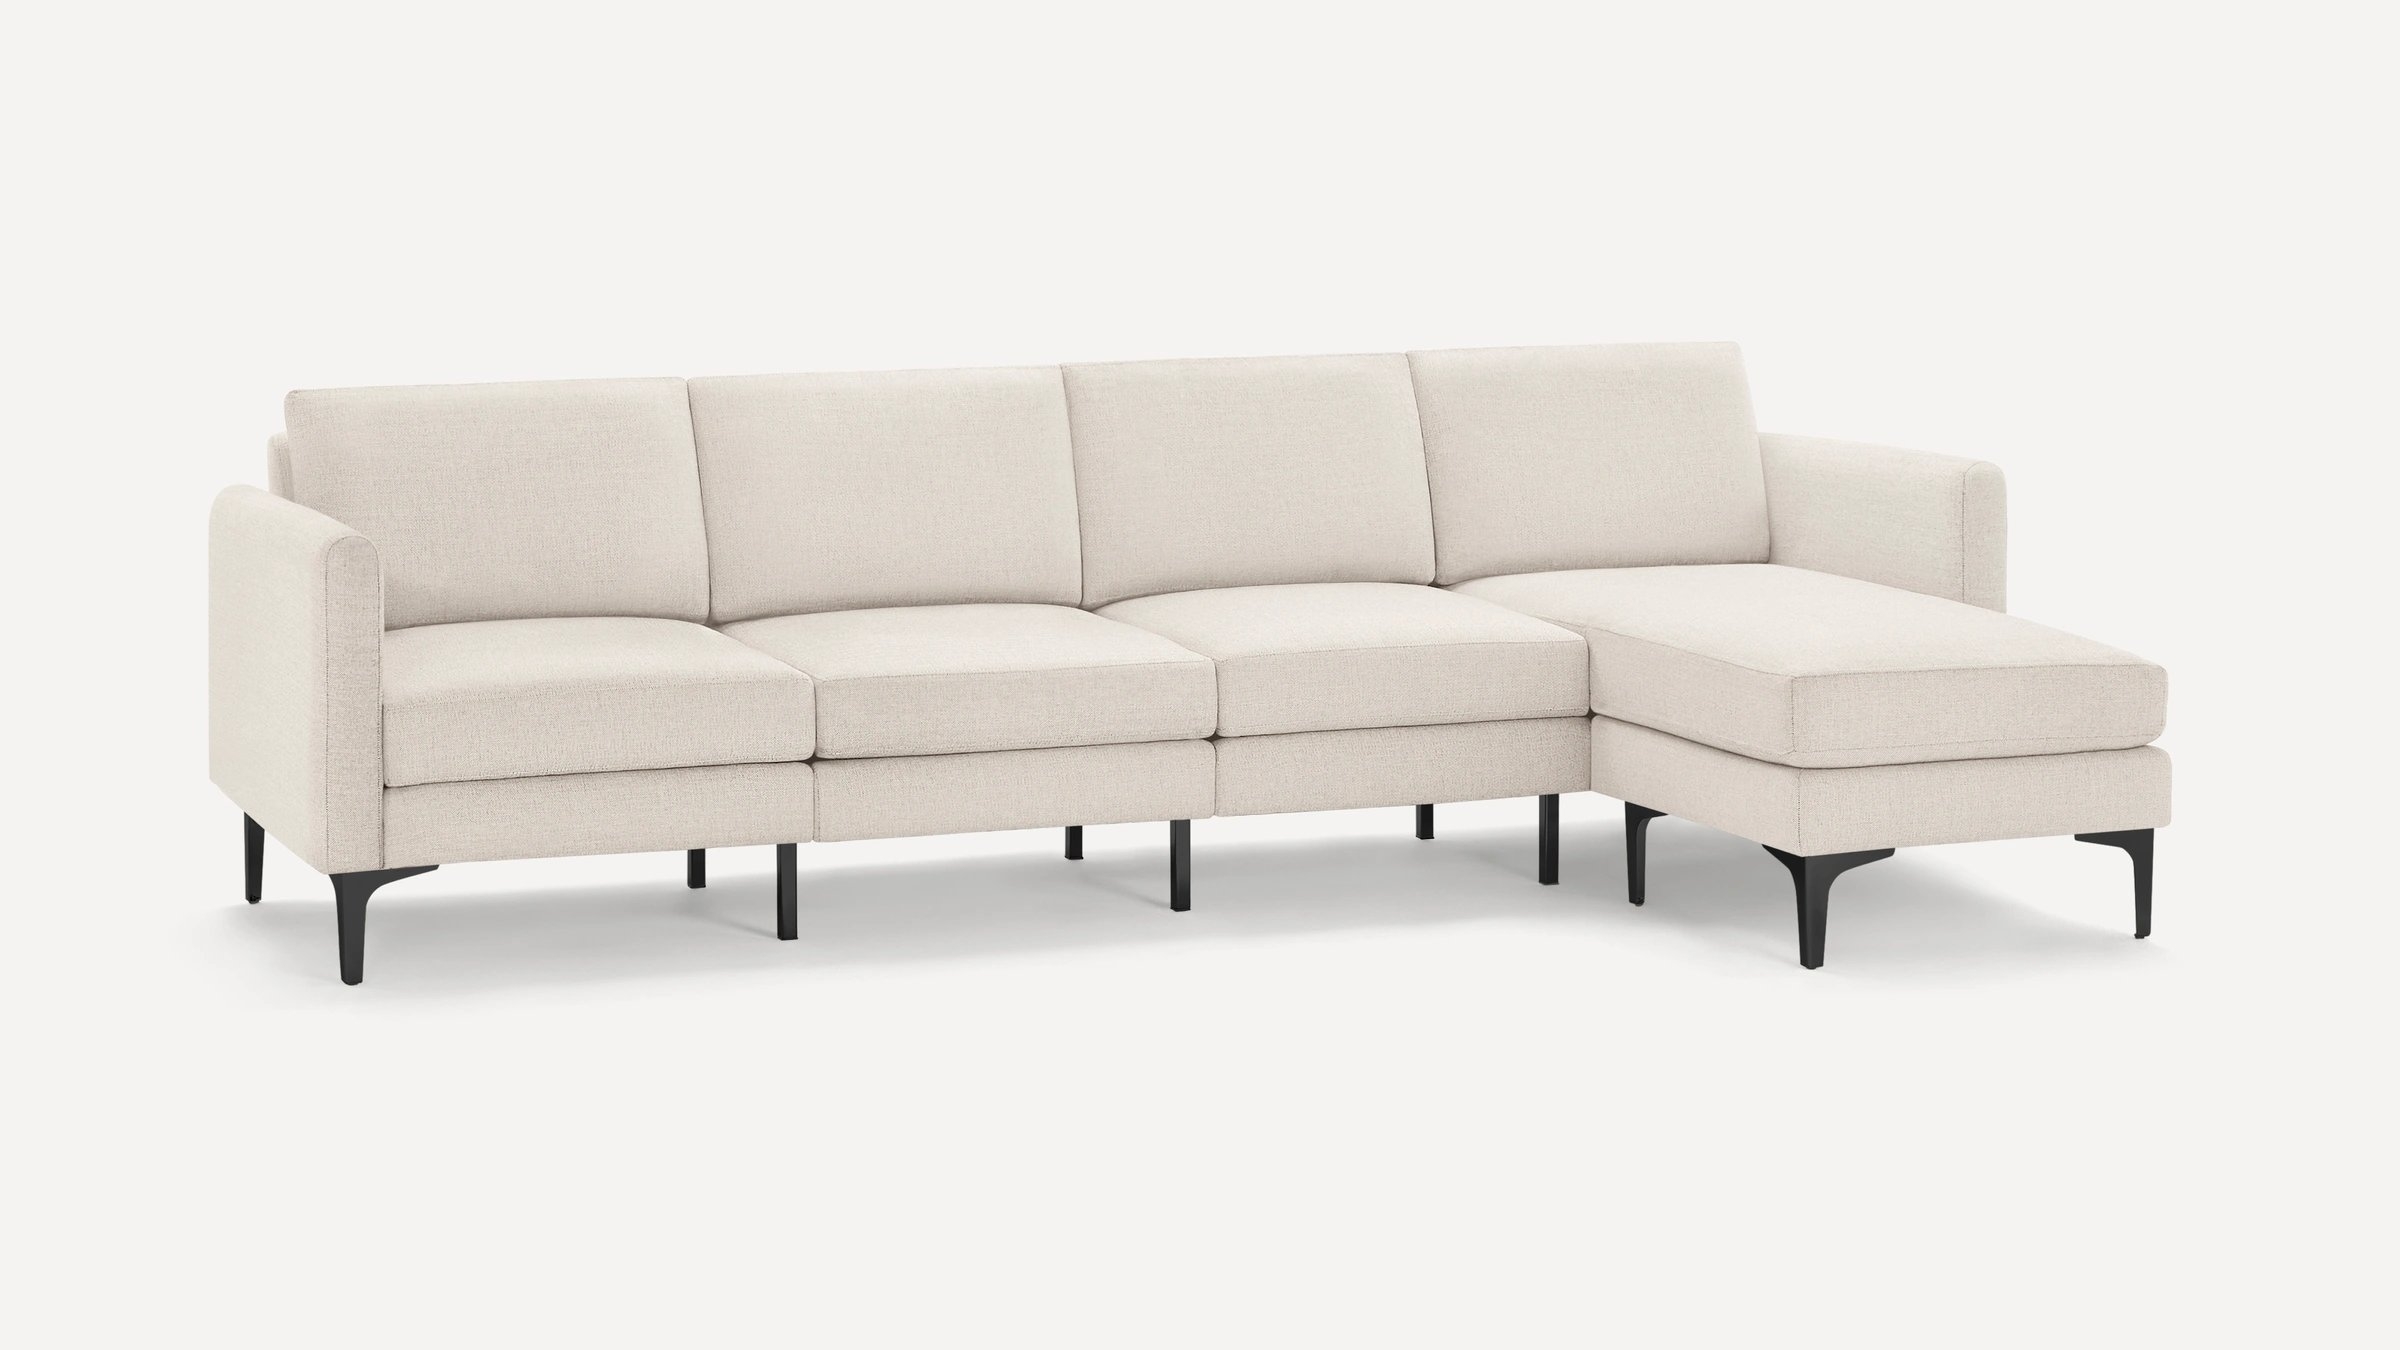 Nomad King Sectional in Ivory, Black Metal Legs - Image 0